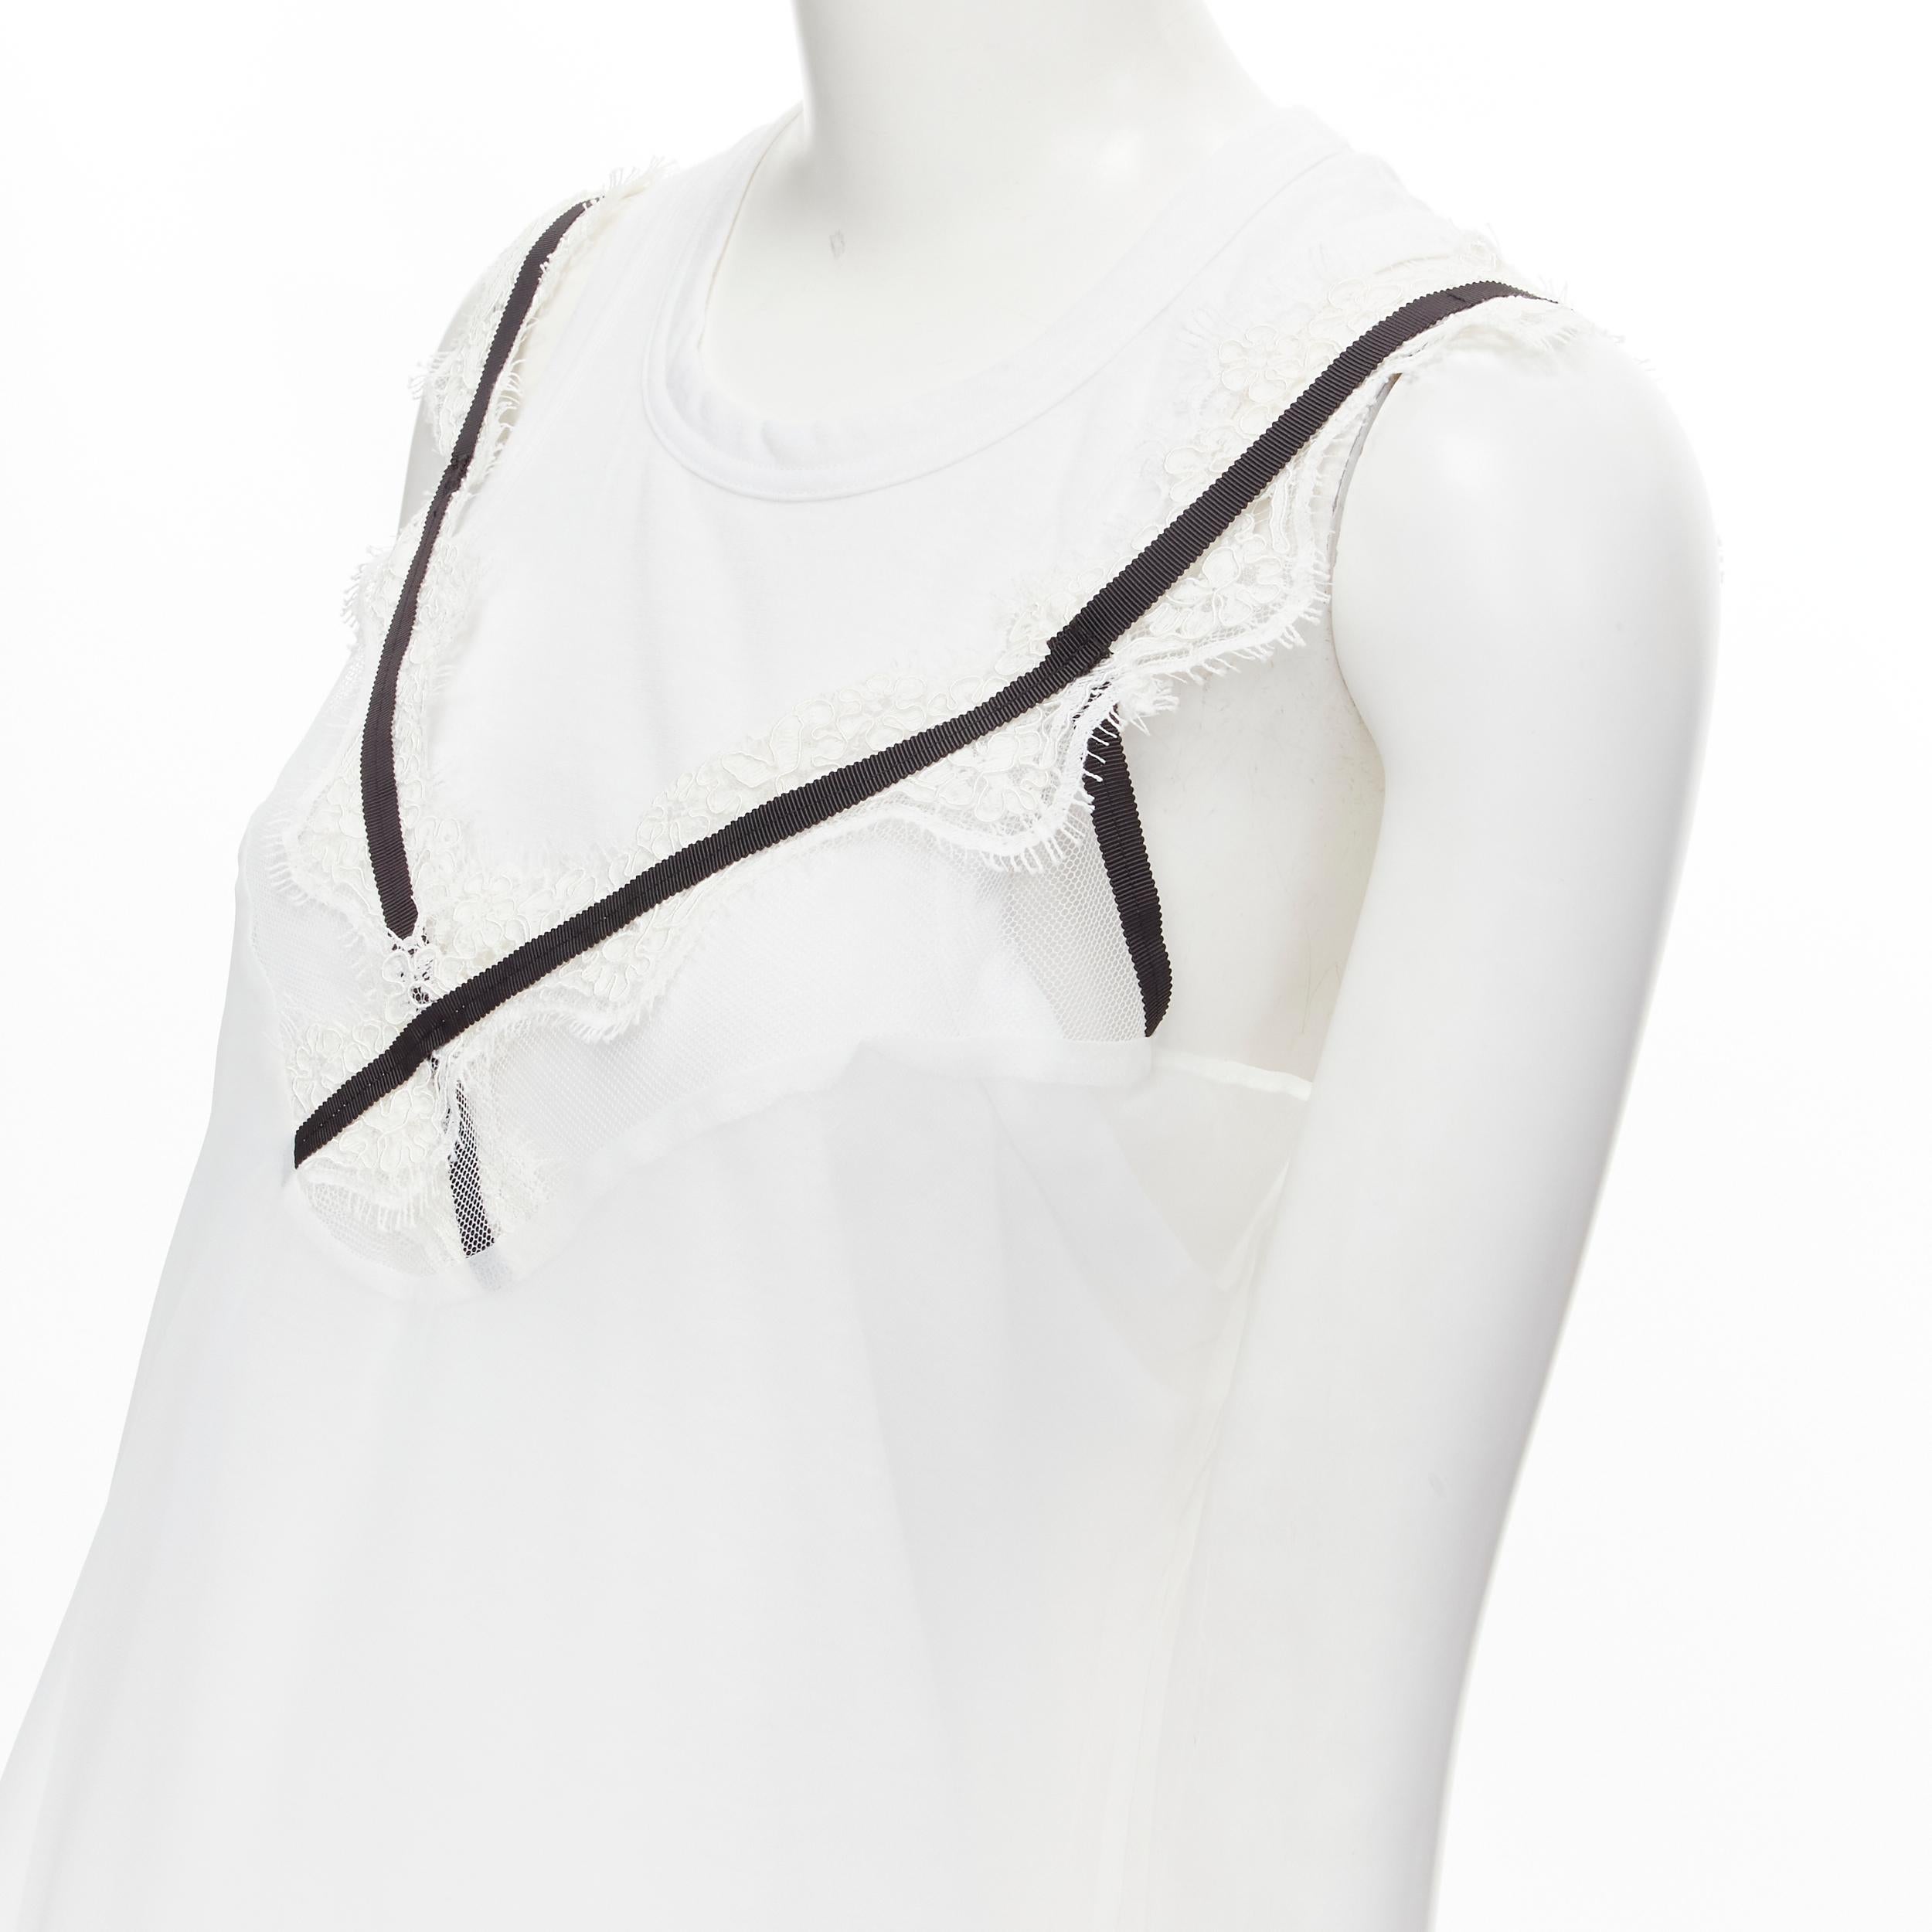 new SACAI white cotton tank layered sheer lace trimmed slip dress JP2 M 
Reference: MELK/A00099 
Brand: Sacai 
Designer: Chitose Abe 
Material: Polyester 
Color: White 
Pattern: Solid 
Made in: Japan 

CONDITION: 
Condition: New with tags. 
Comes